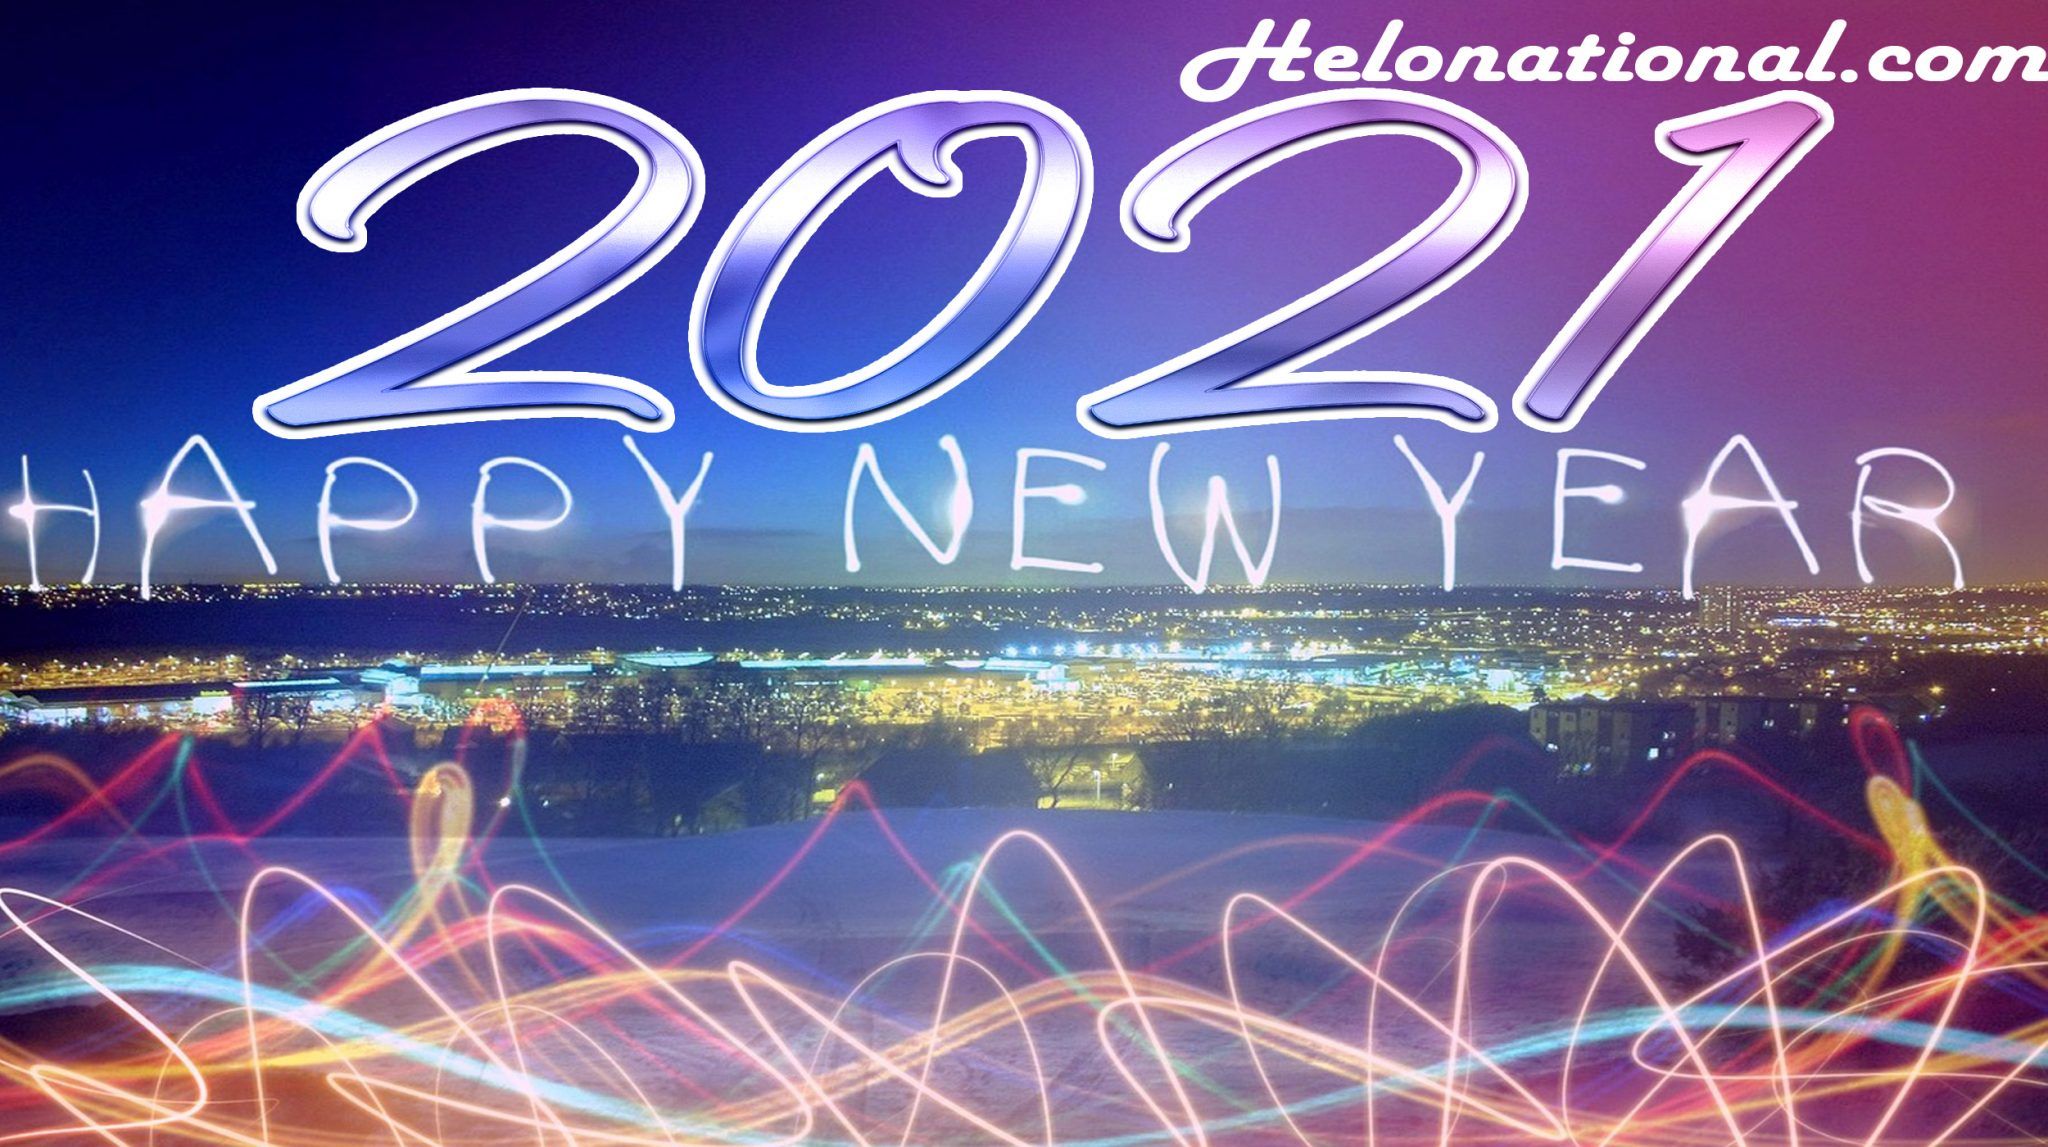 Happy New Year 2021 Image & Wishes: HNY 2021 Collection